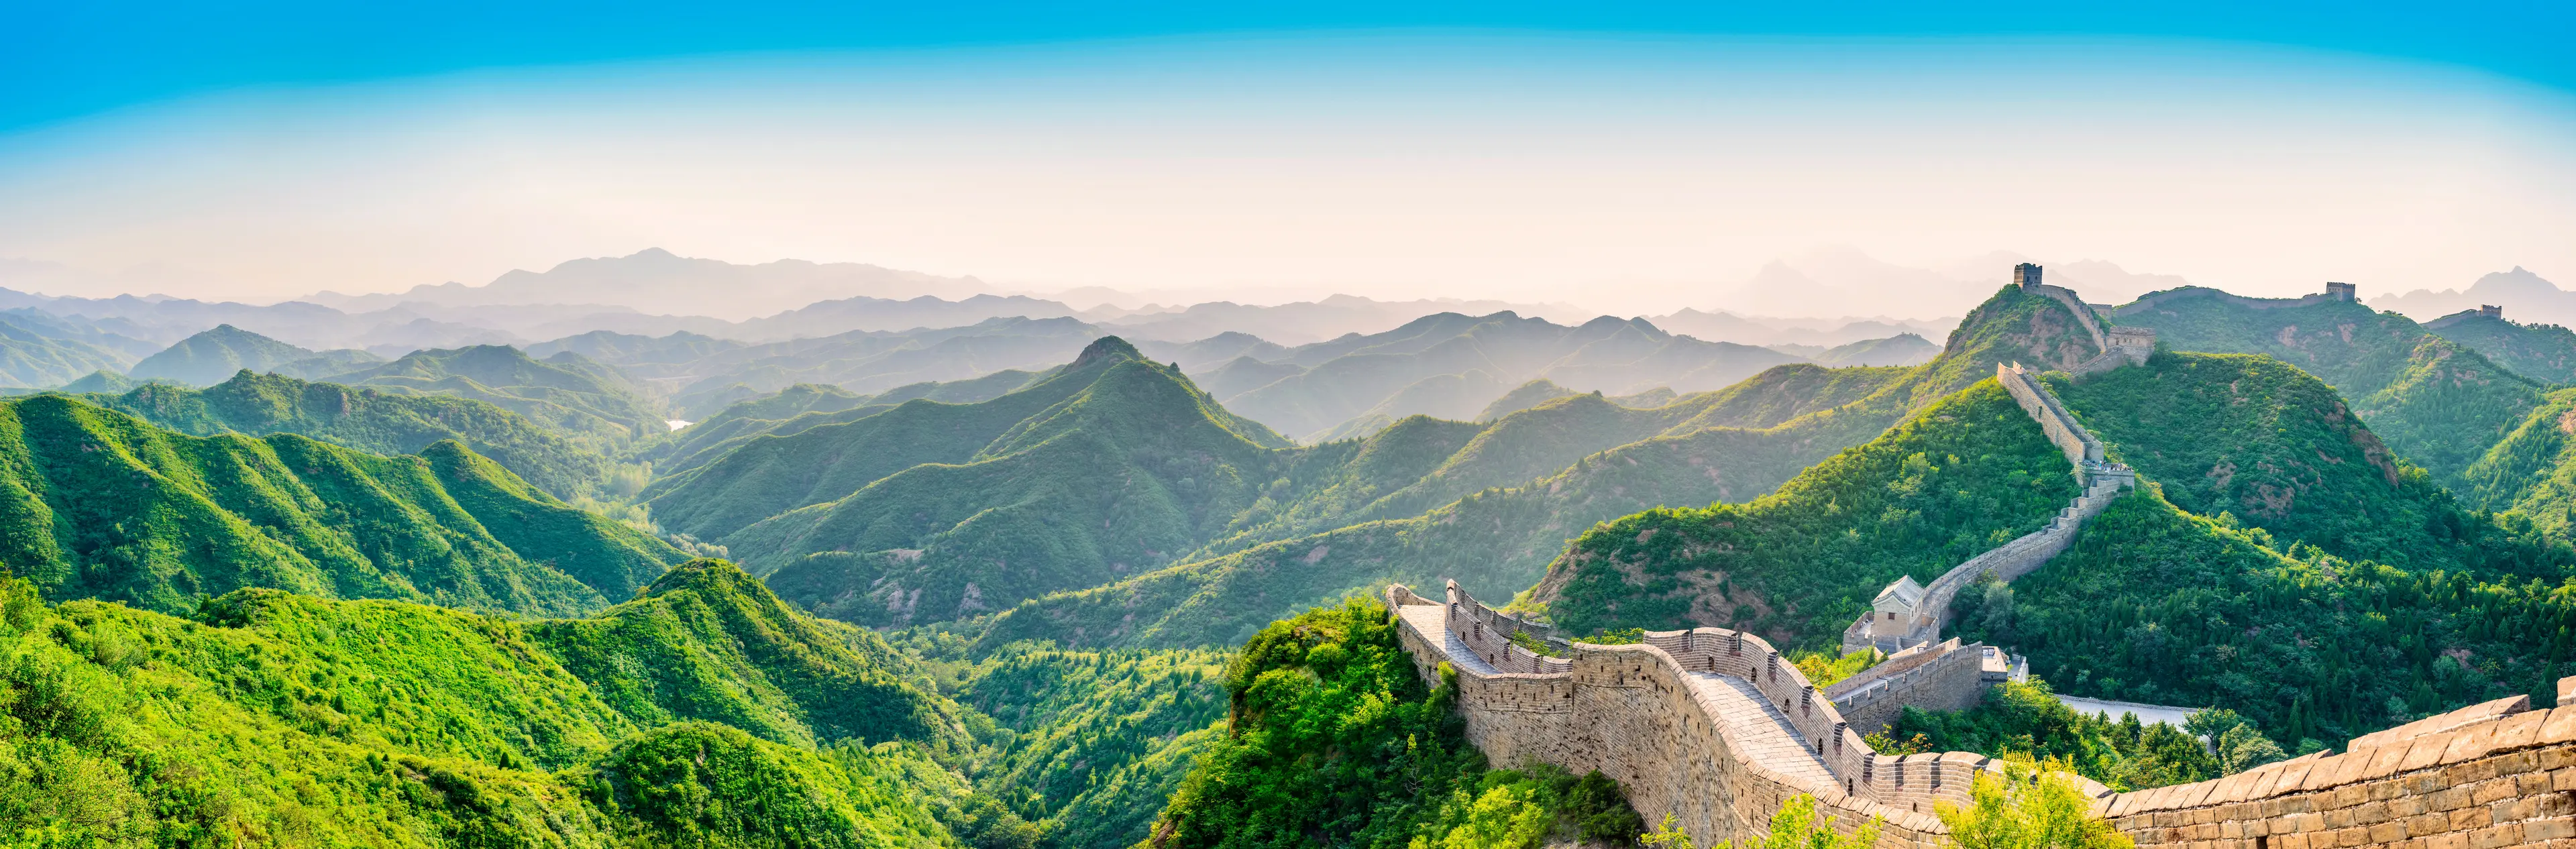 2-Day Sightseeing and Outdoor Adventure at Great Wall of China